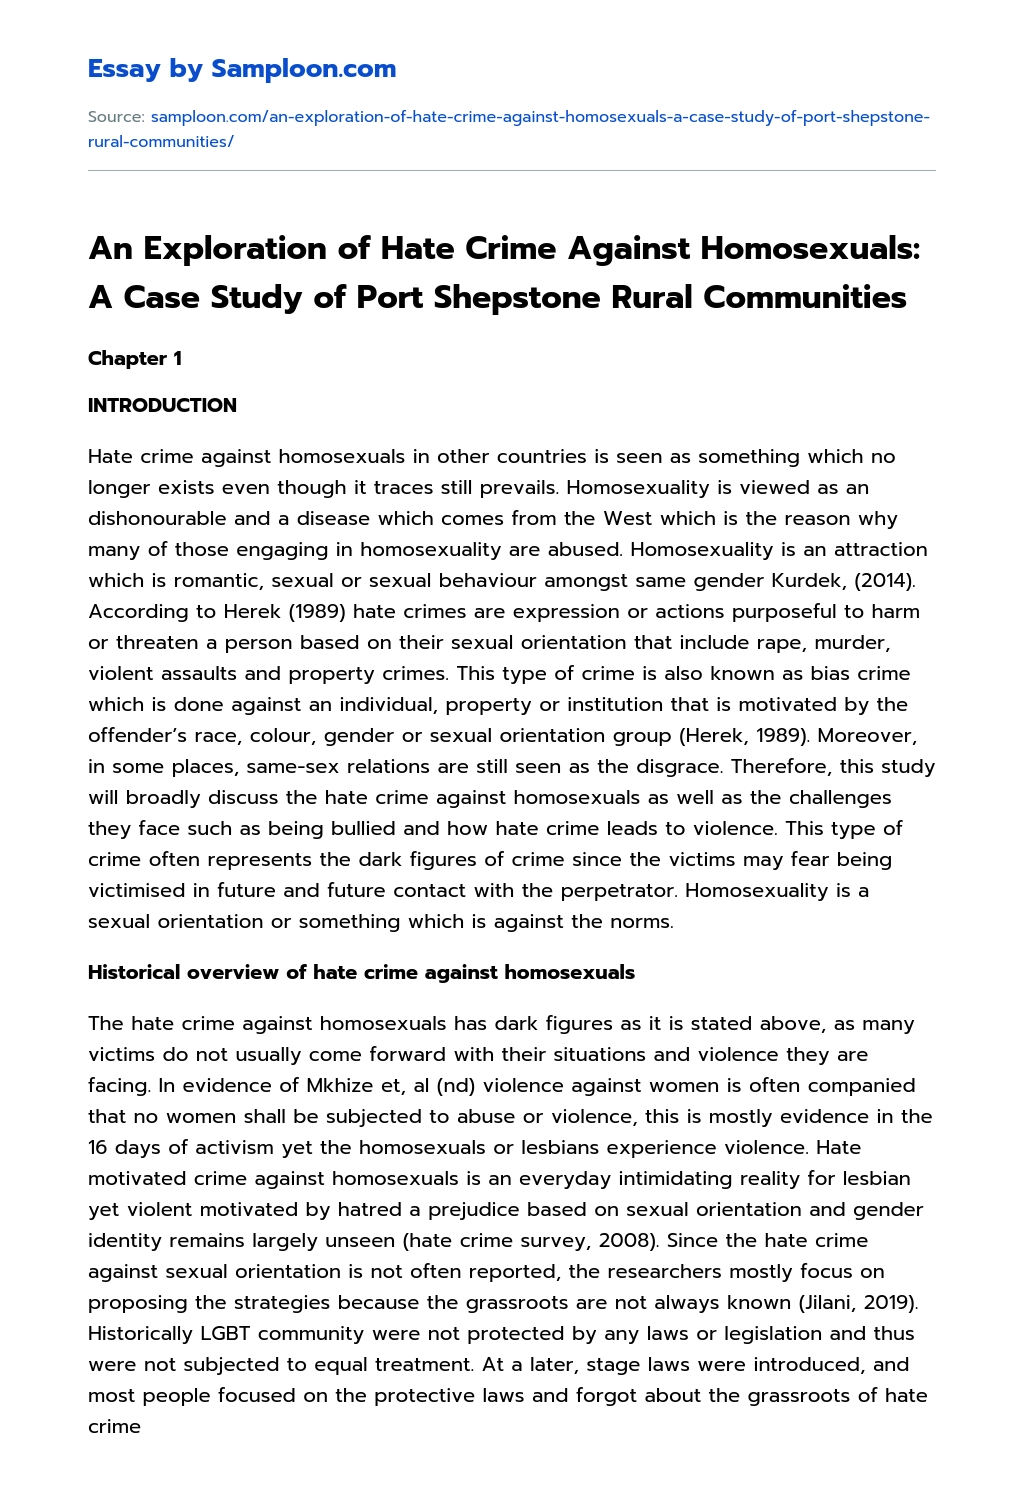 An Exploration of Hate Crime Against Homosexuals: A Case Study of Port Shepstone Rural Communities essay